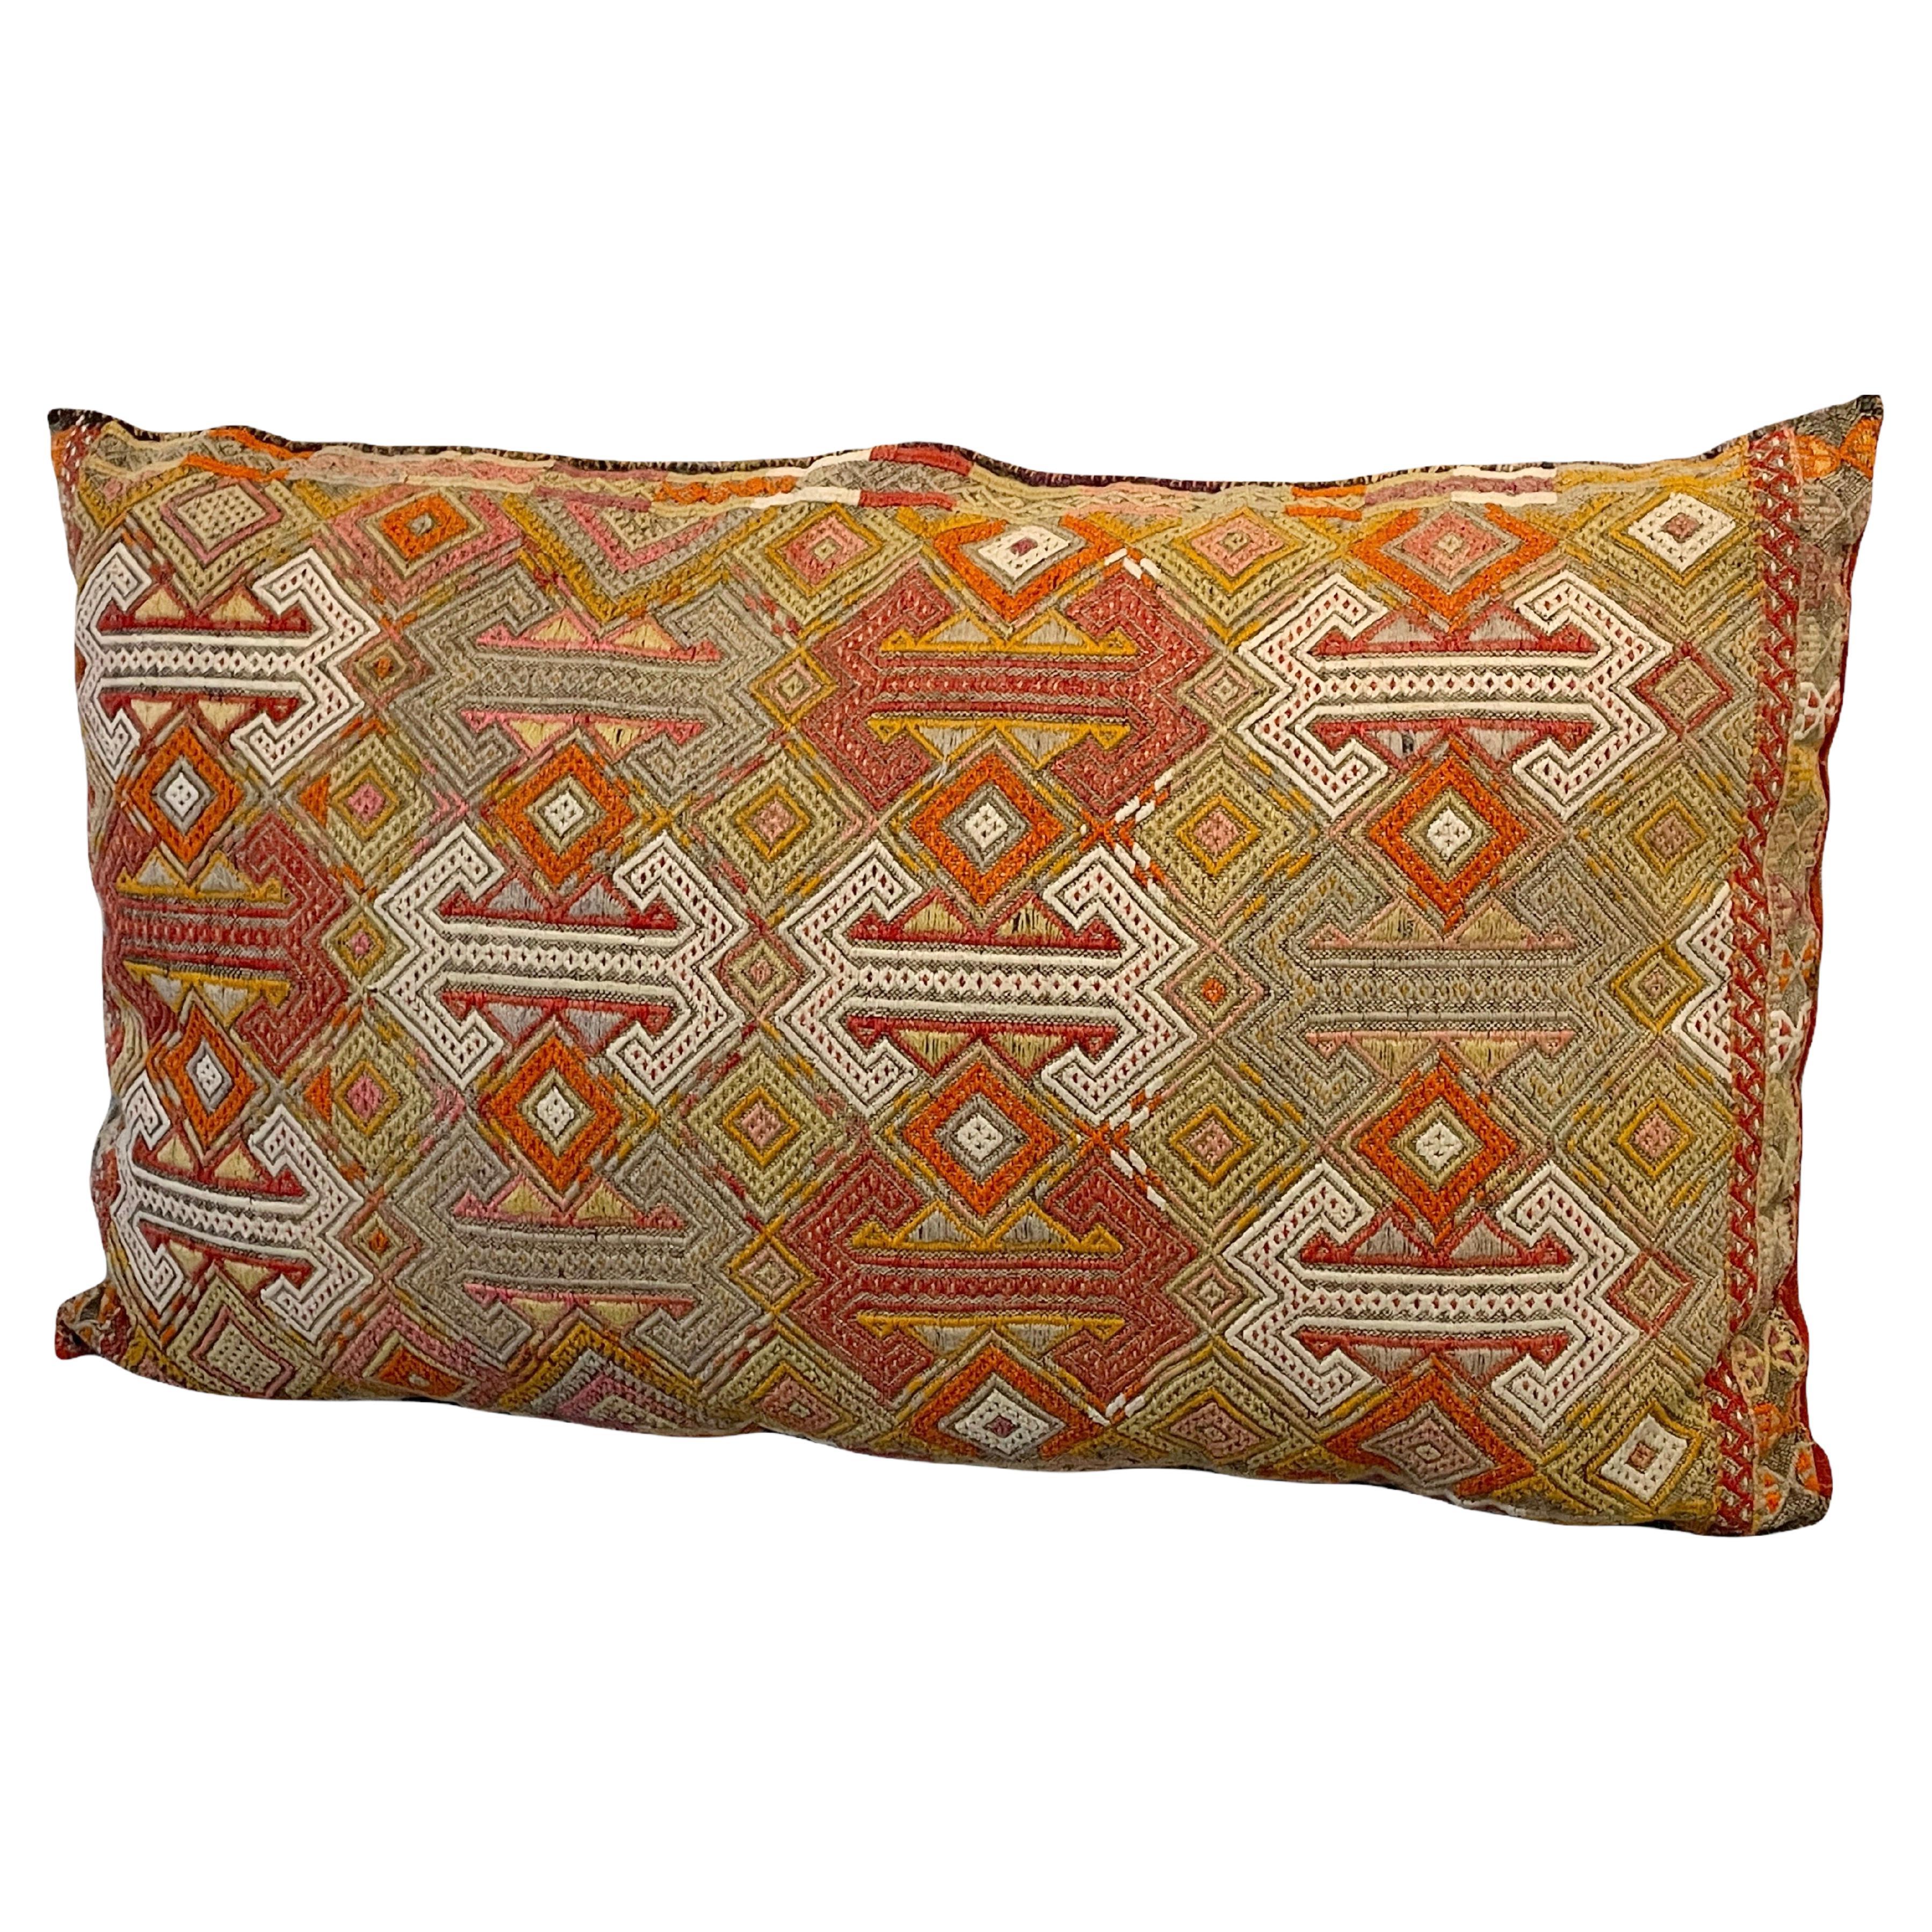 Stunning Large Gypsy Turkish Oriental Salt Bag or Rug Embroidery Pillow For Sale